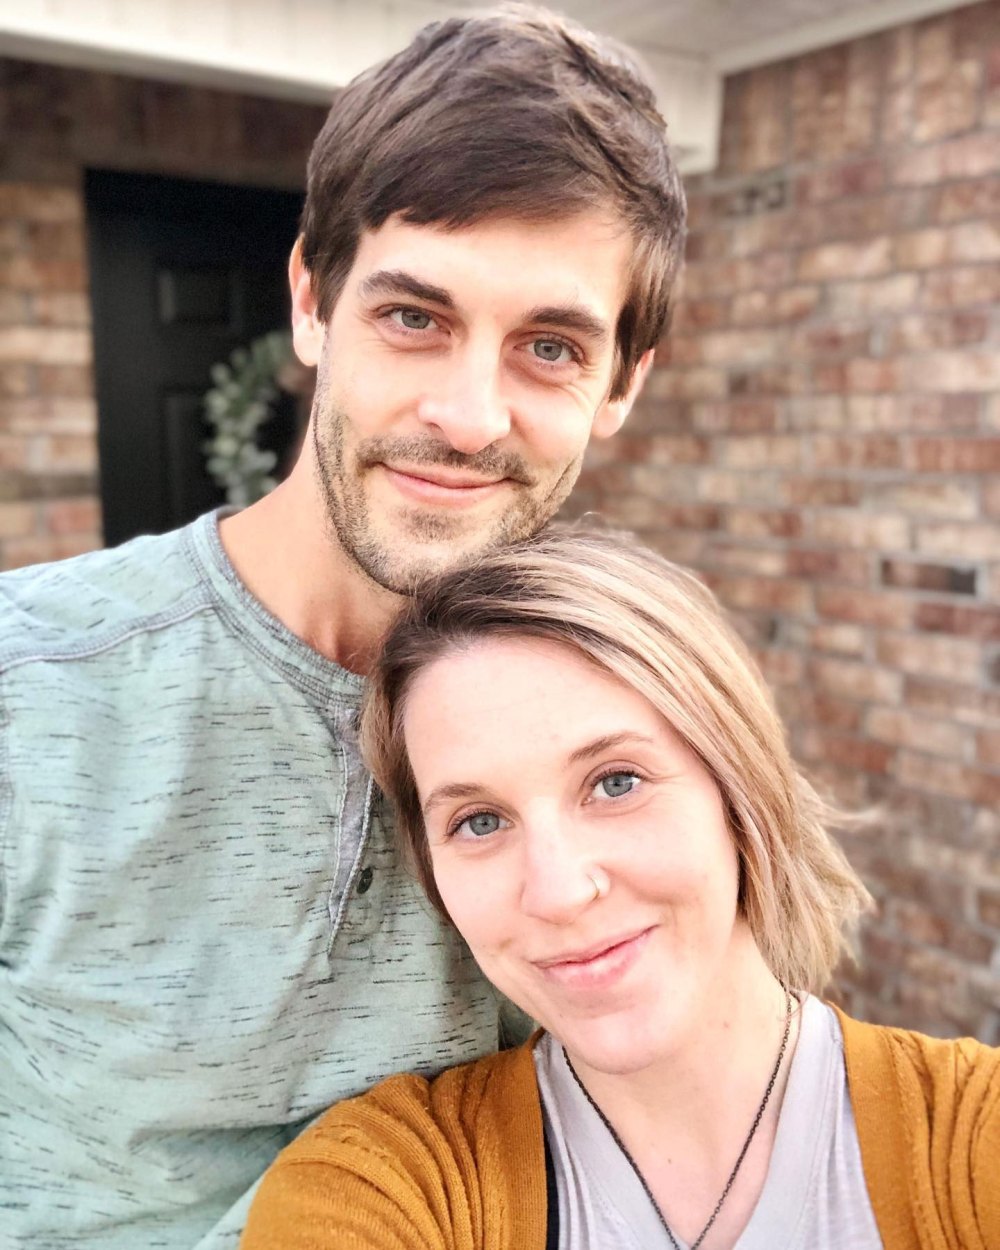 Counting On's Jill Duggar Reflects on Miscarriage 1 Year Later